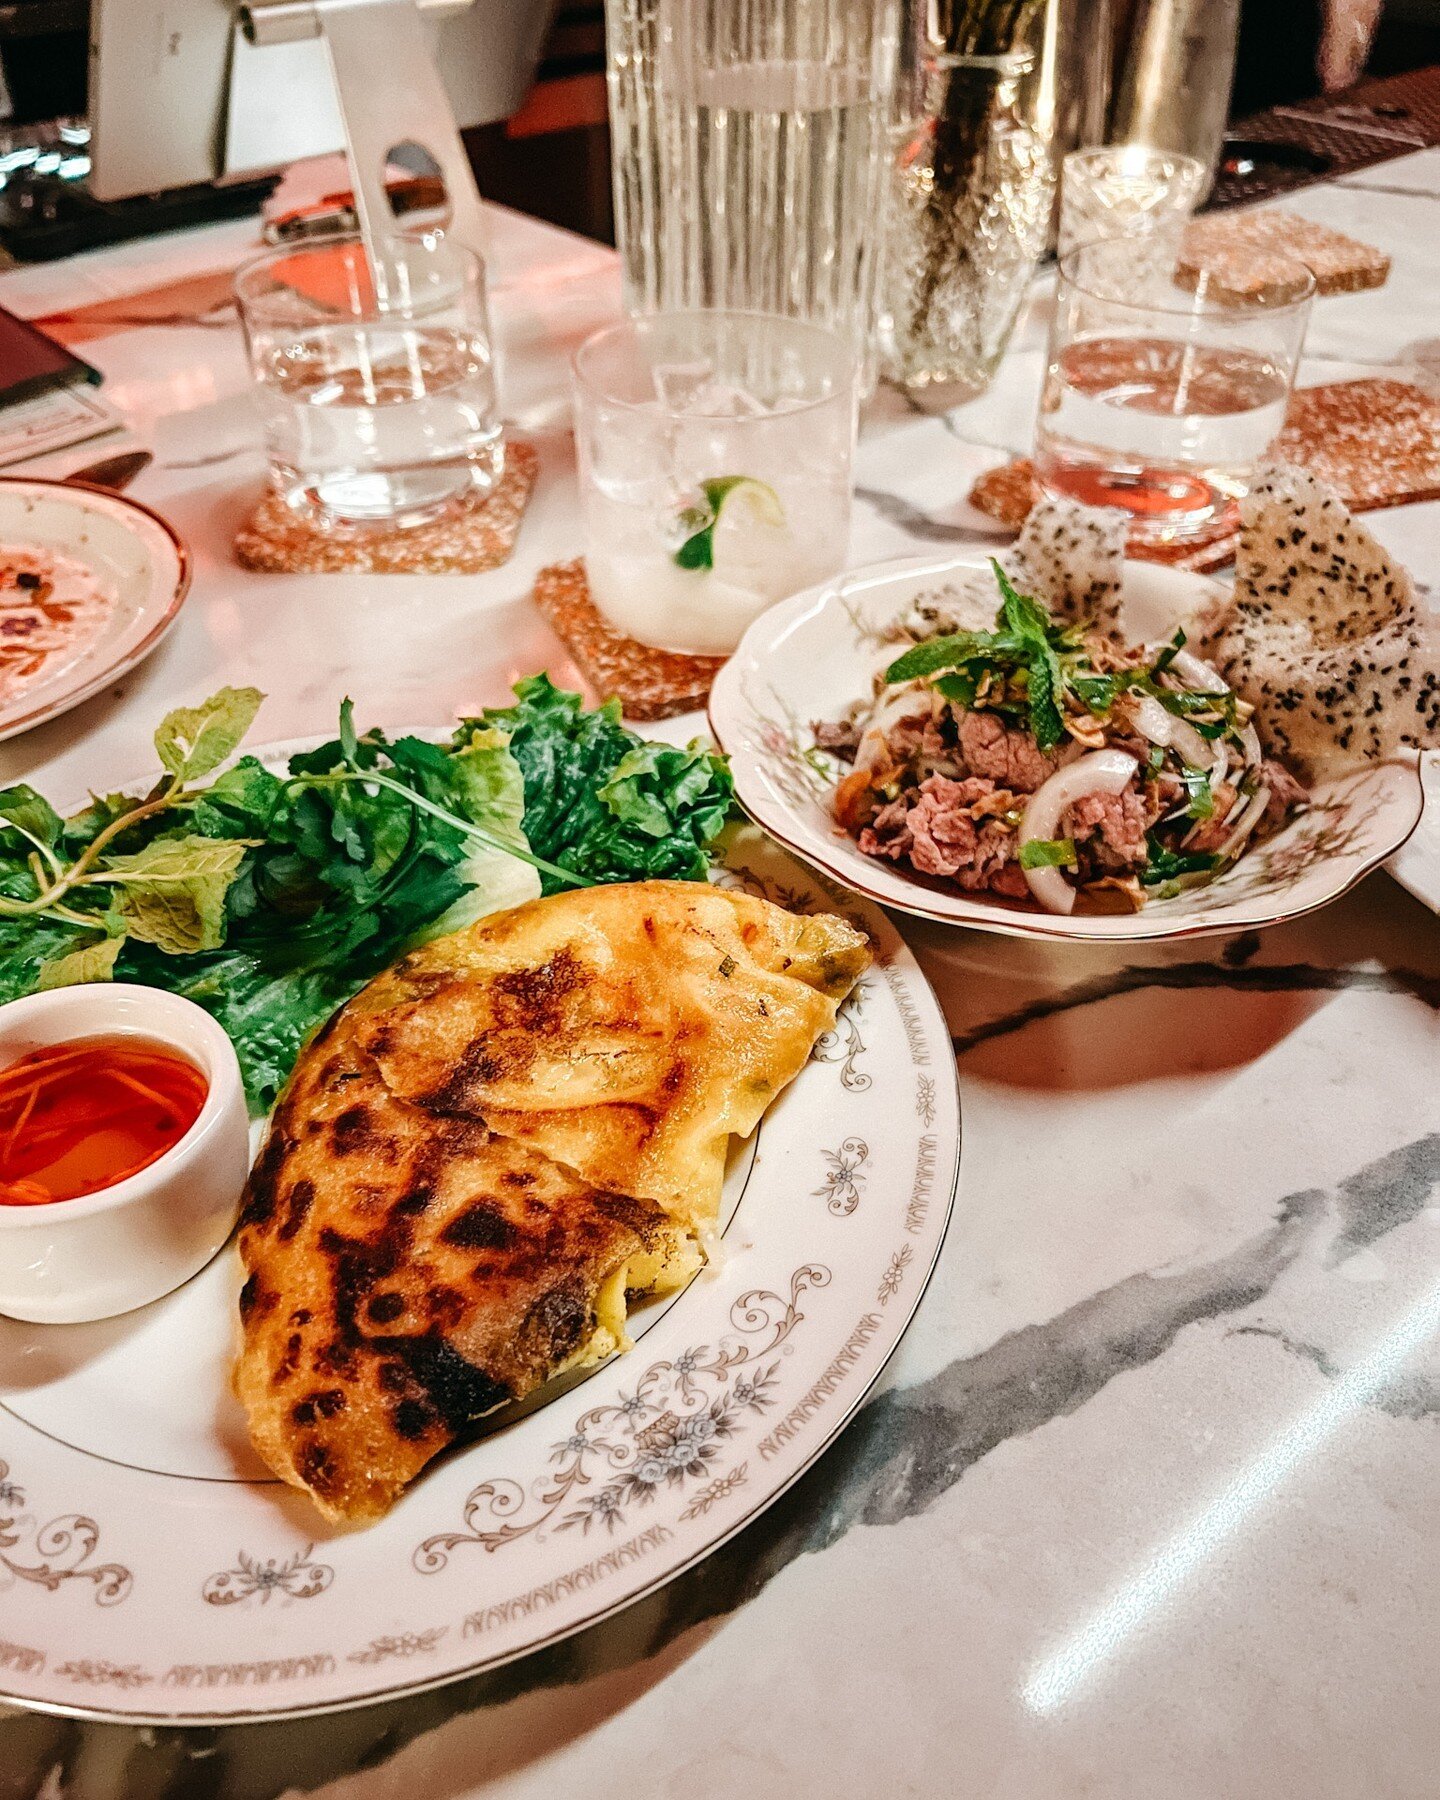 Start your week on a high note&hellip;.. with us! 

Join us tonight for our Viet-French collaboration menu with Friendship Kitchen. The dishes are inspired by the Vietnamese experience and aim to reclaim its unique heritage through a sort of culinary